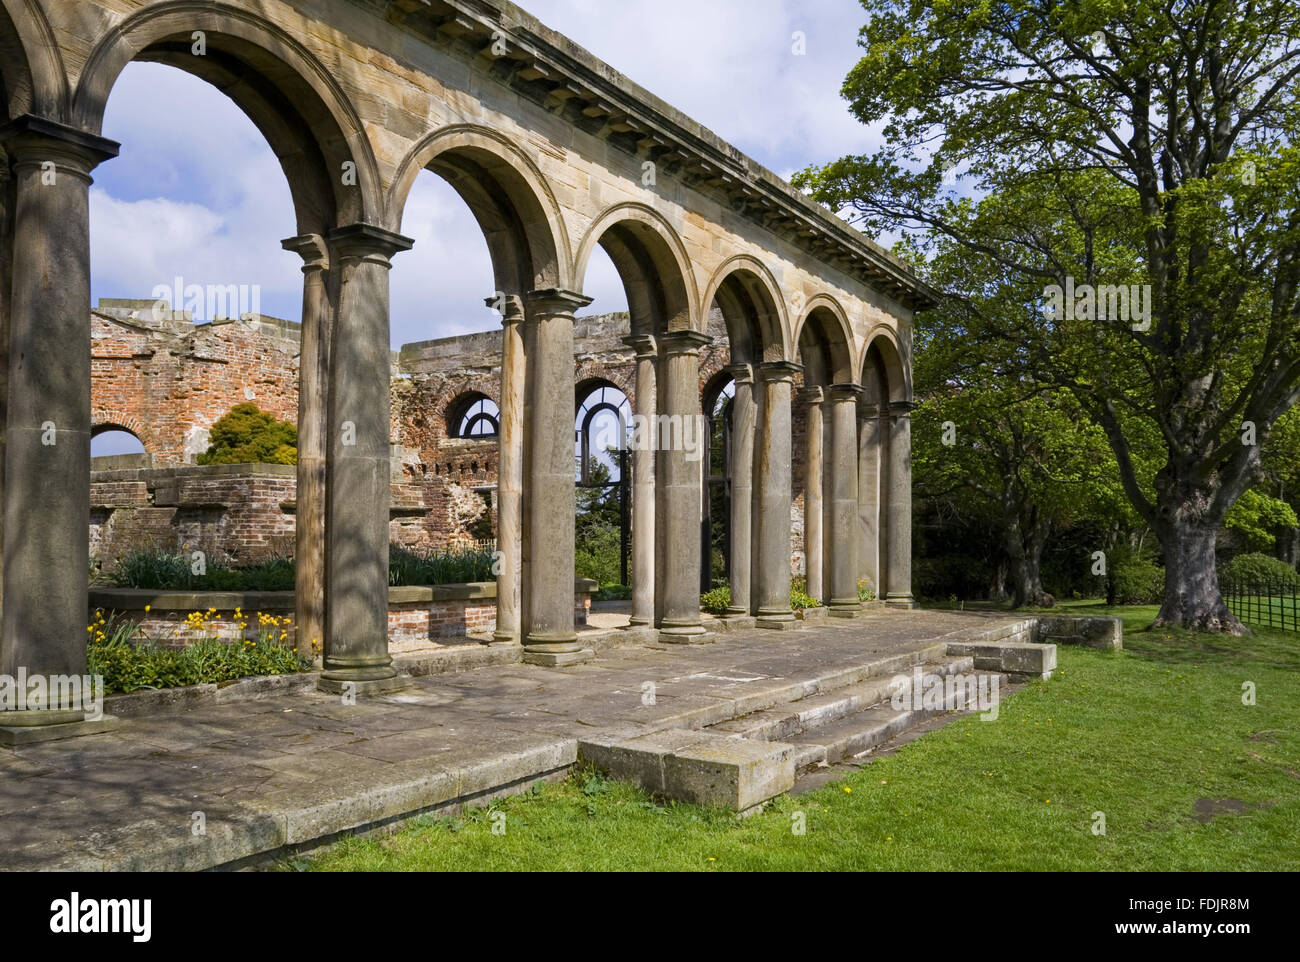 The Tuscan columns and arched arcade of the Orangery, which was begun in 1772 to a design attributed to James Paine, at Gibside, Newcastle upon Tyne. George Bowes inherited the estate in 1722 and landscaped the grounds and created buildings around Gibside Stock Photo